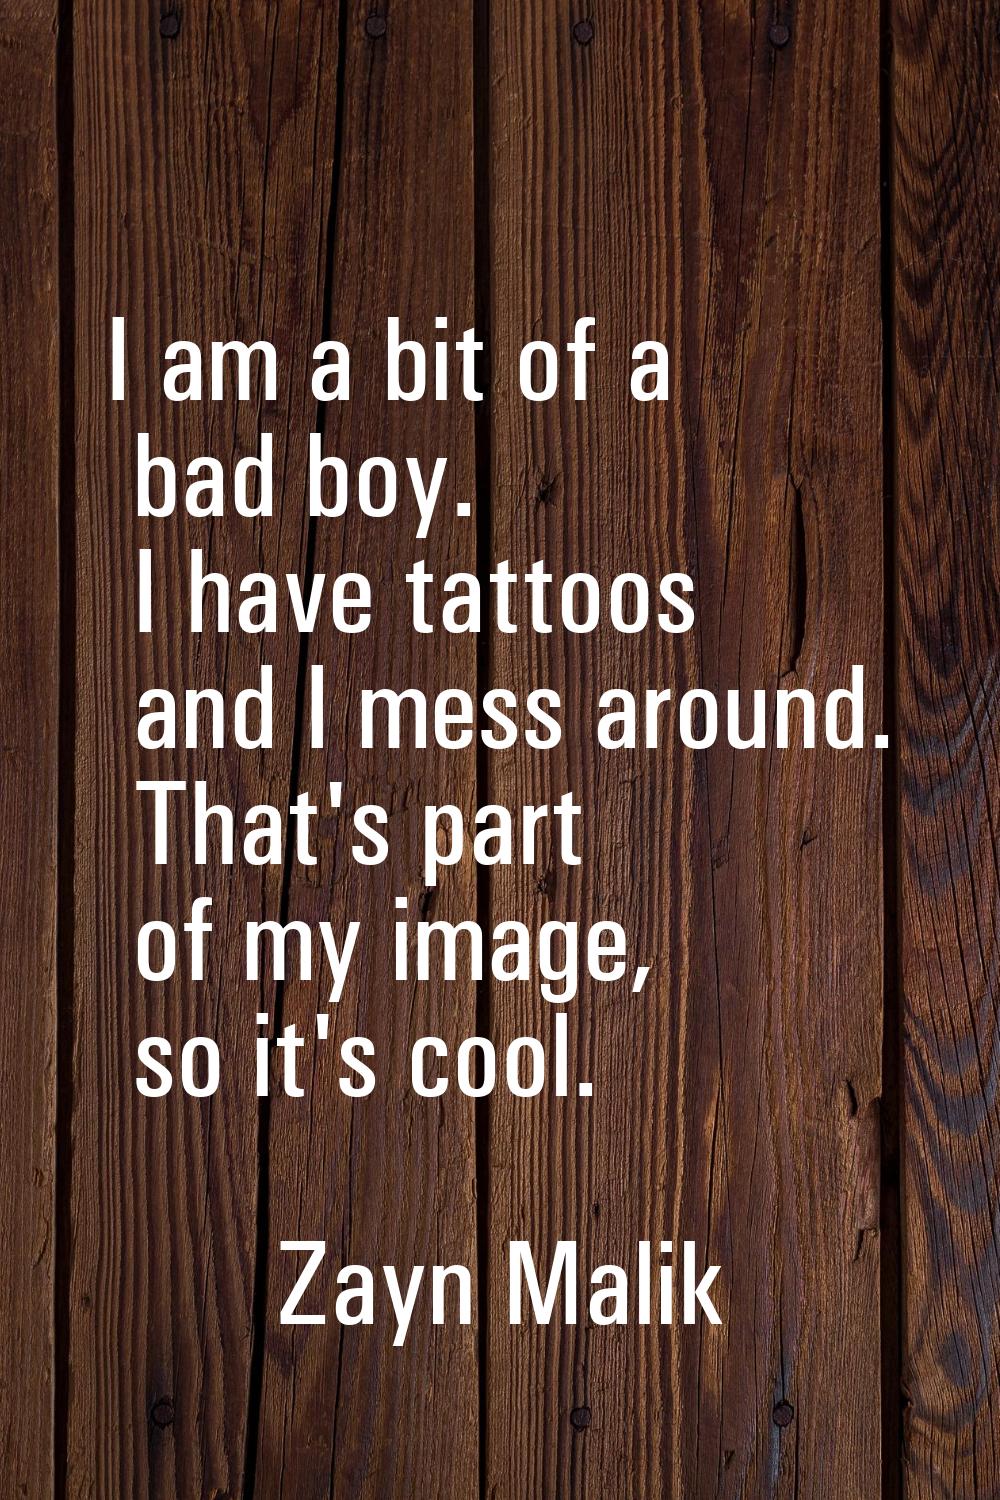 I am a bit of a bad boy. I have tattoos and I mess around. That's part of my image, so it's cool.